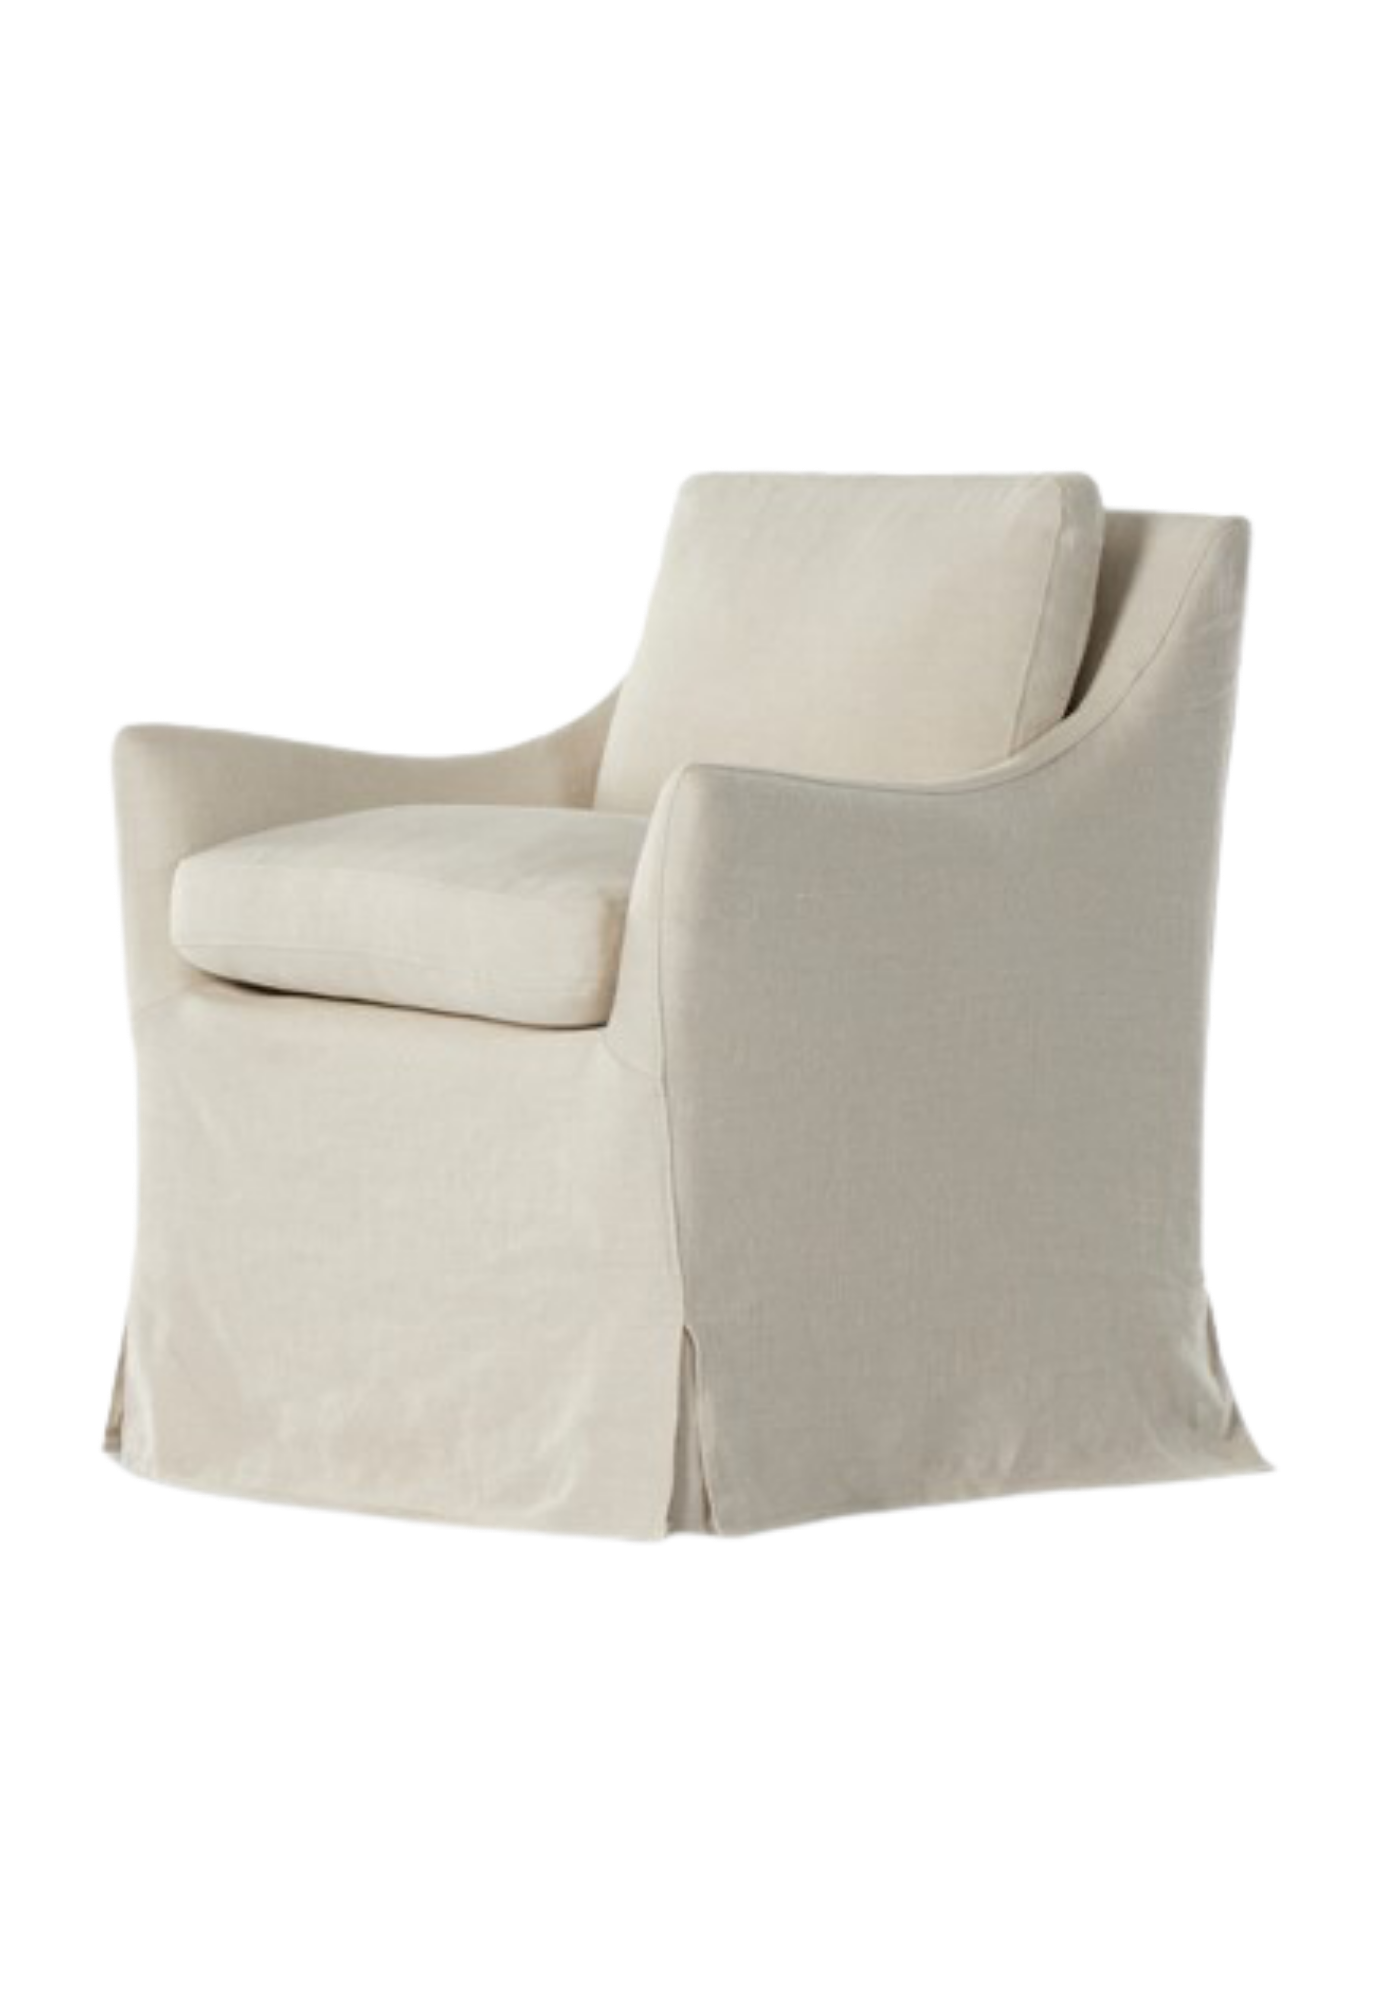 Colbie Slipcover Dining Chair